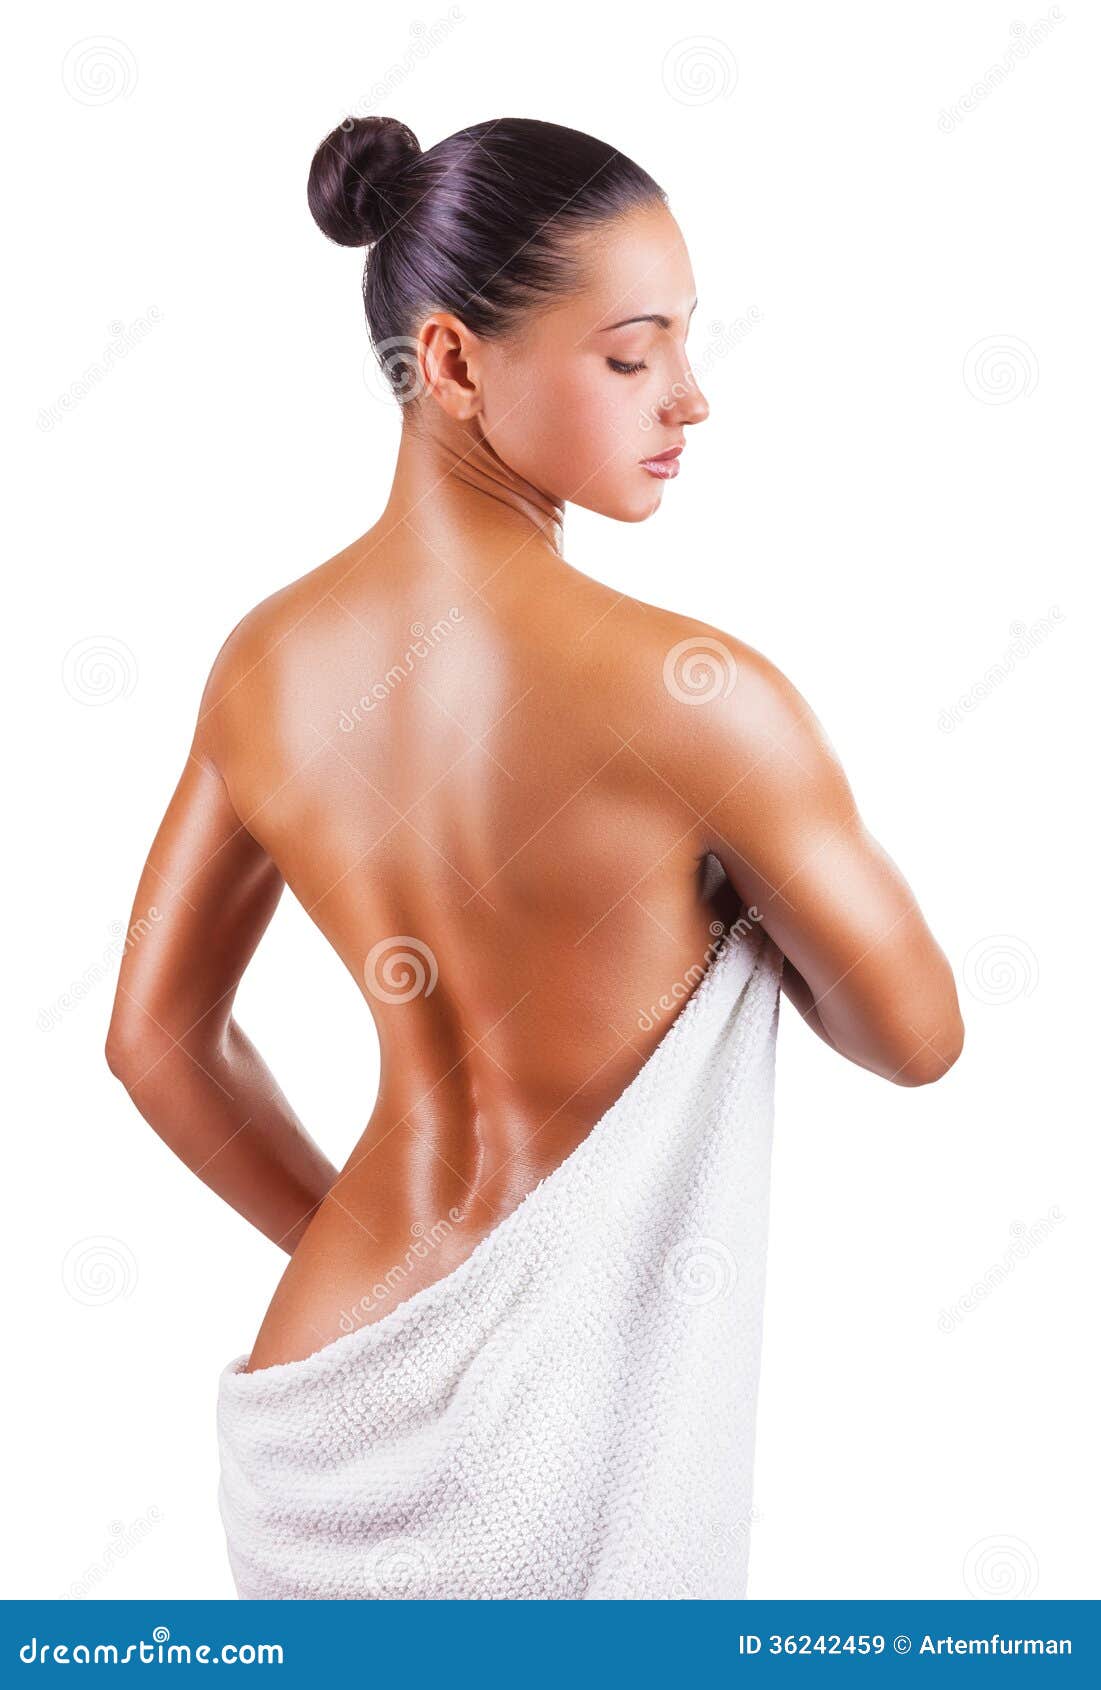 https://thumbs.dreamstime.com/z/female-back-beautiful-young-woman-isolated-white-background-36242459.jpg